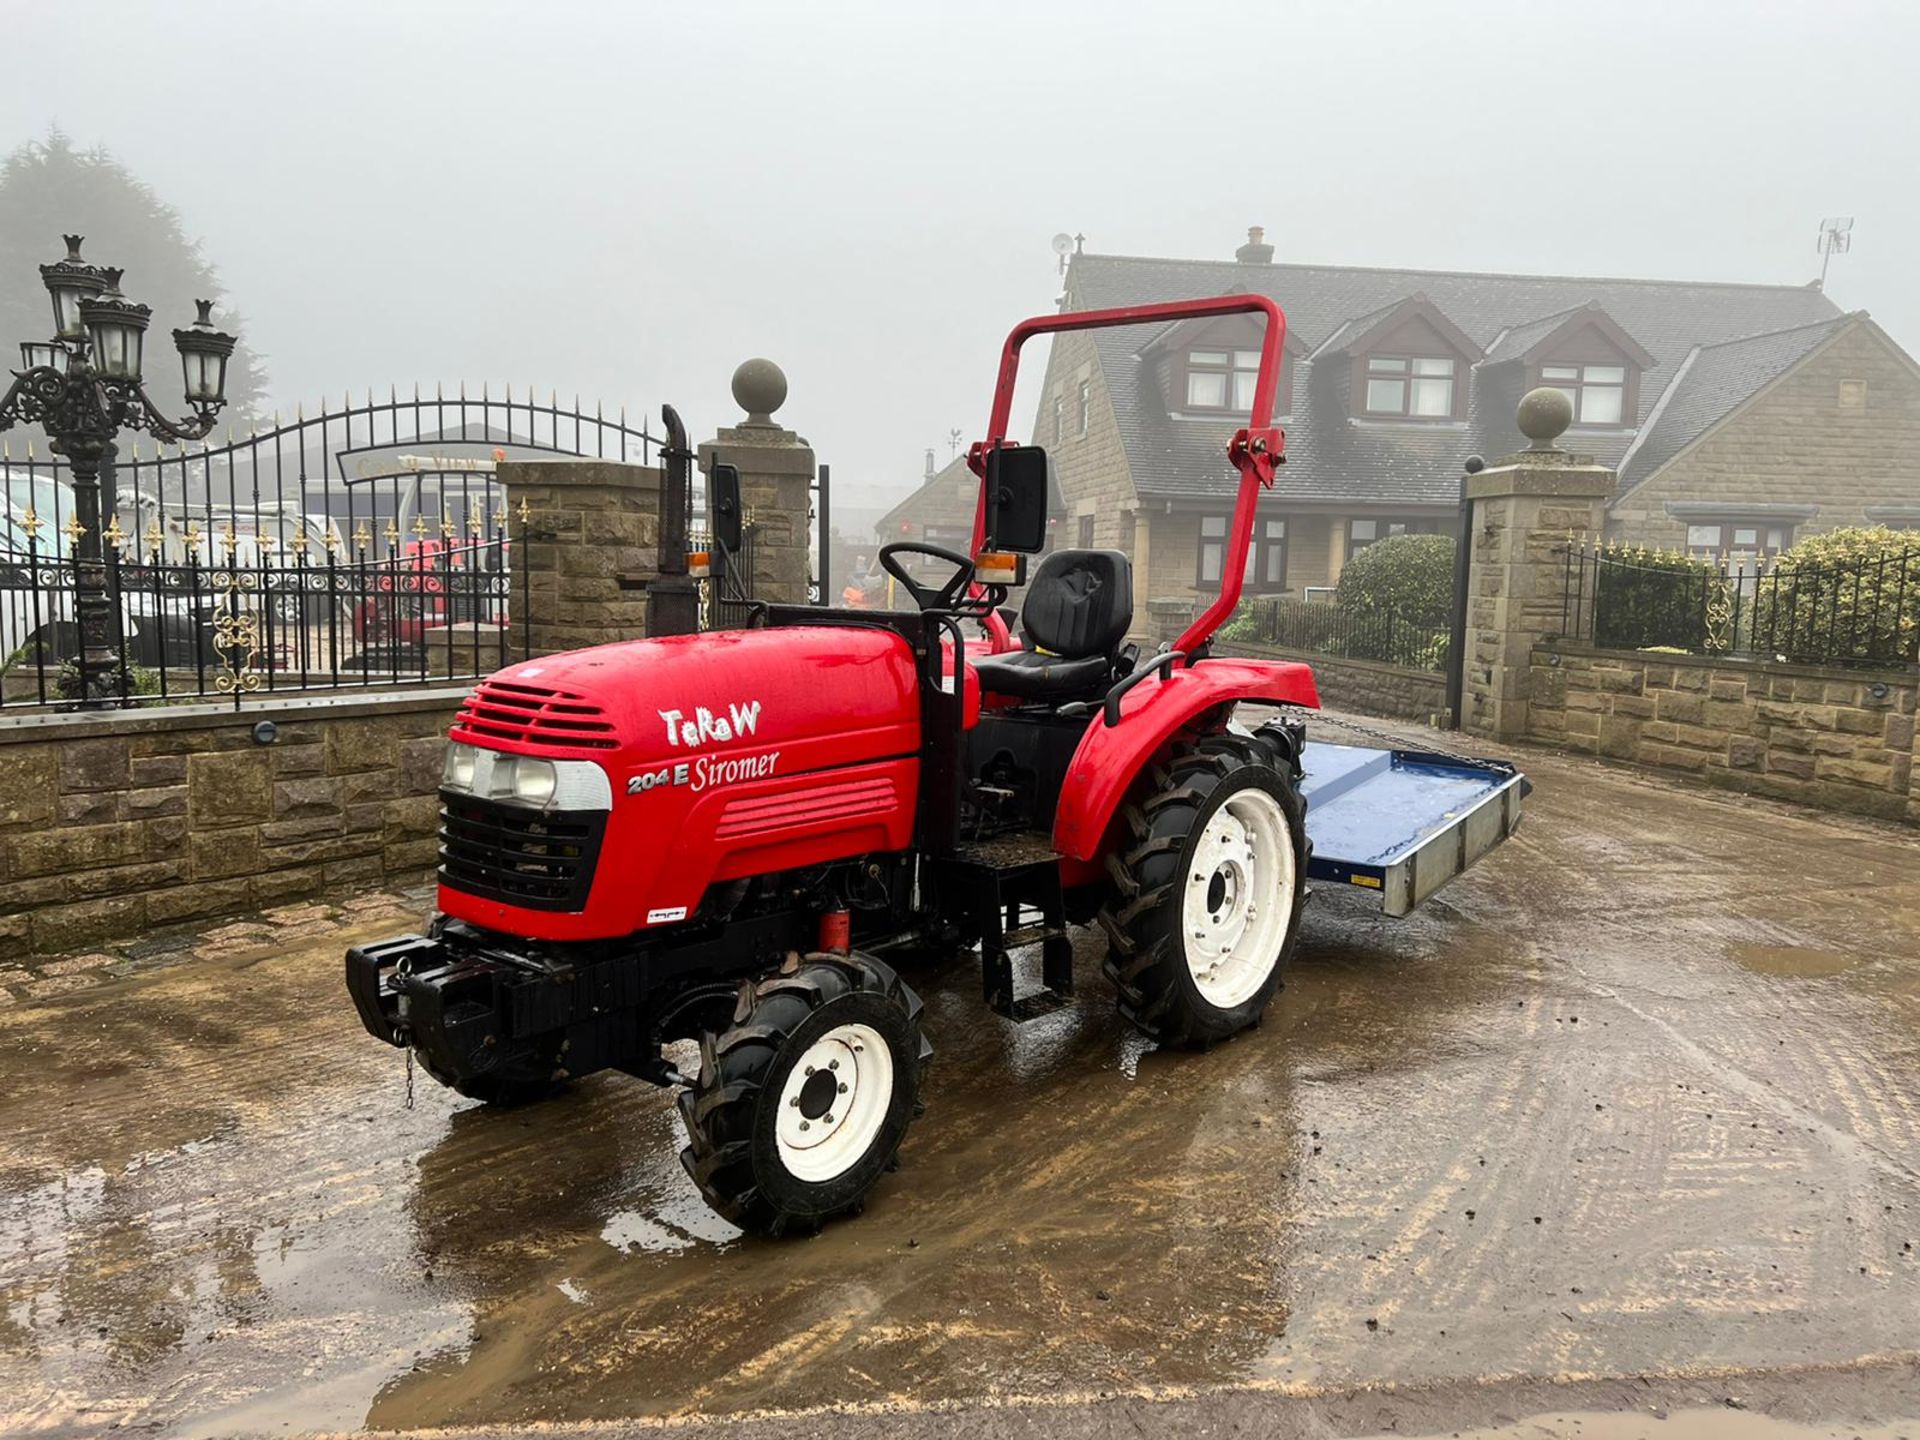 SIROMER 204E 20hp 4WD COMPACT TRACTOR WITH TOPPER, RUNS DRIVES AND CUTS, 326 HOURS *PLUS VAT* - Image 2 of 15